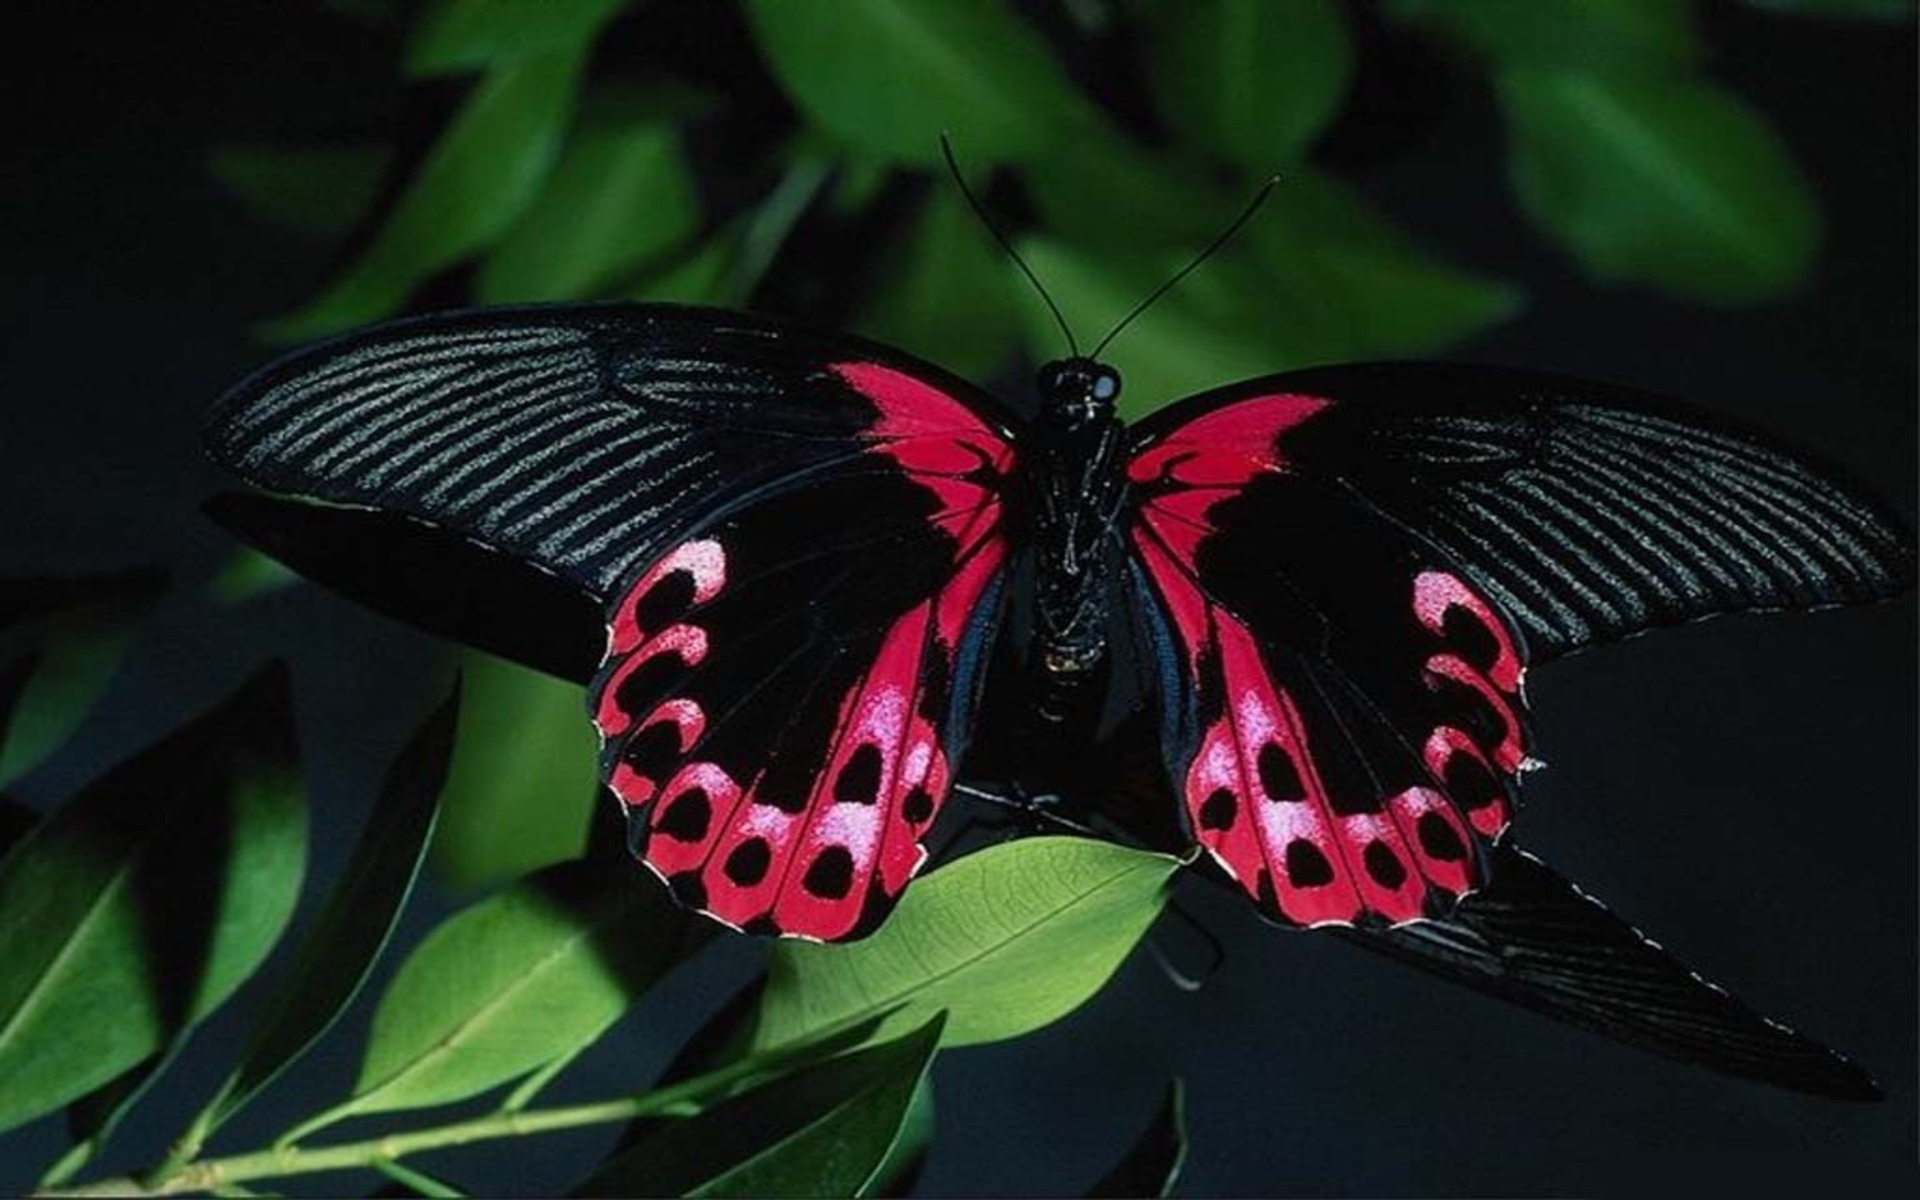 DOWNLOAD: black-butterfly free picture 2560 x 1600